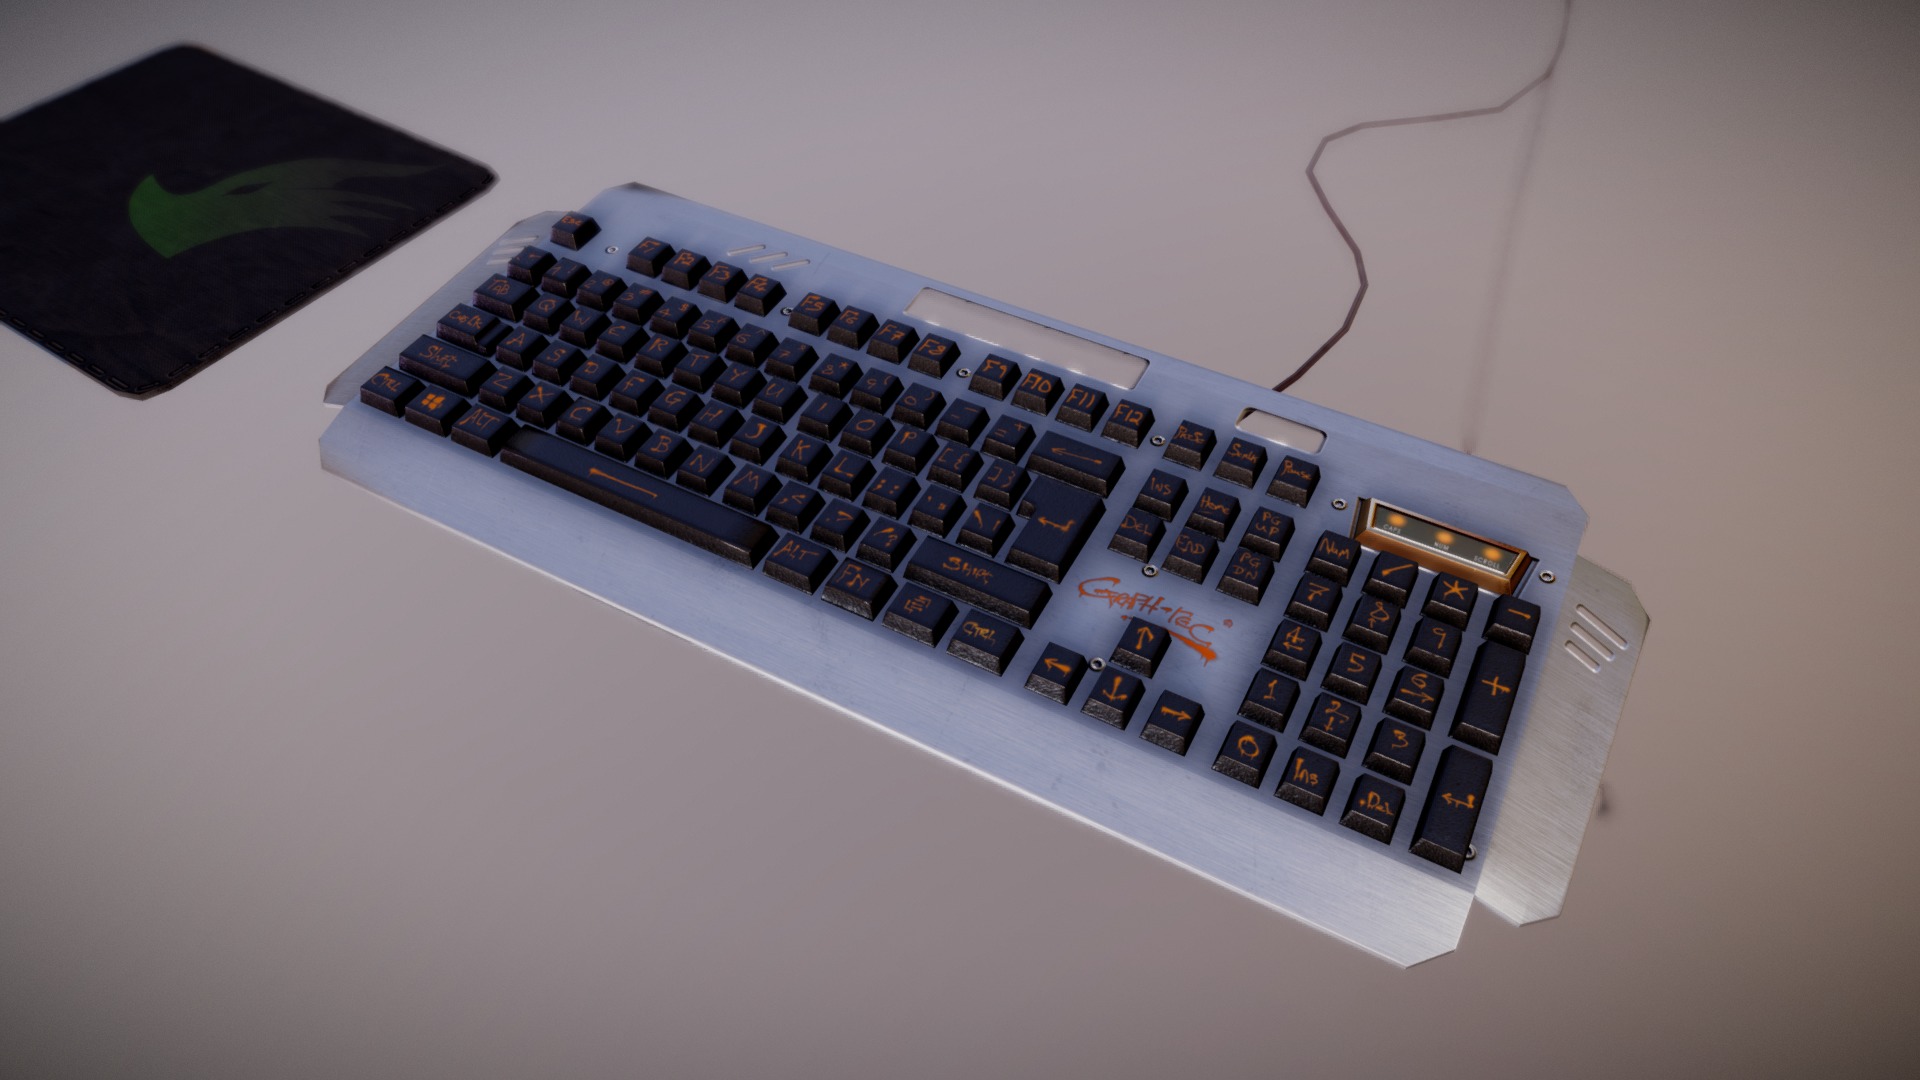 3D model PC Keyboard, mouse mat & coaster - This is a 3D model of the PC Keyboard, mouse mat & coaster. The 3D model is about a keyboard on a table.